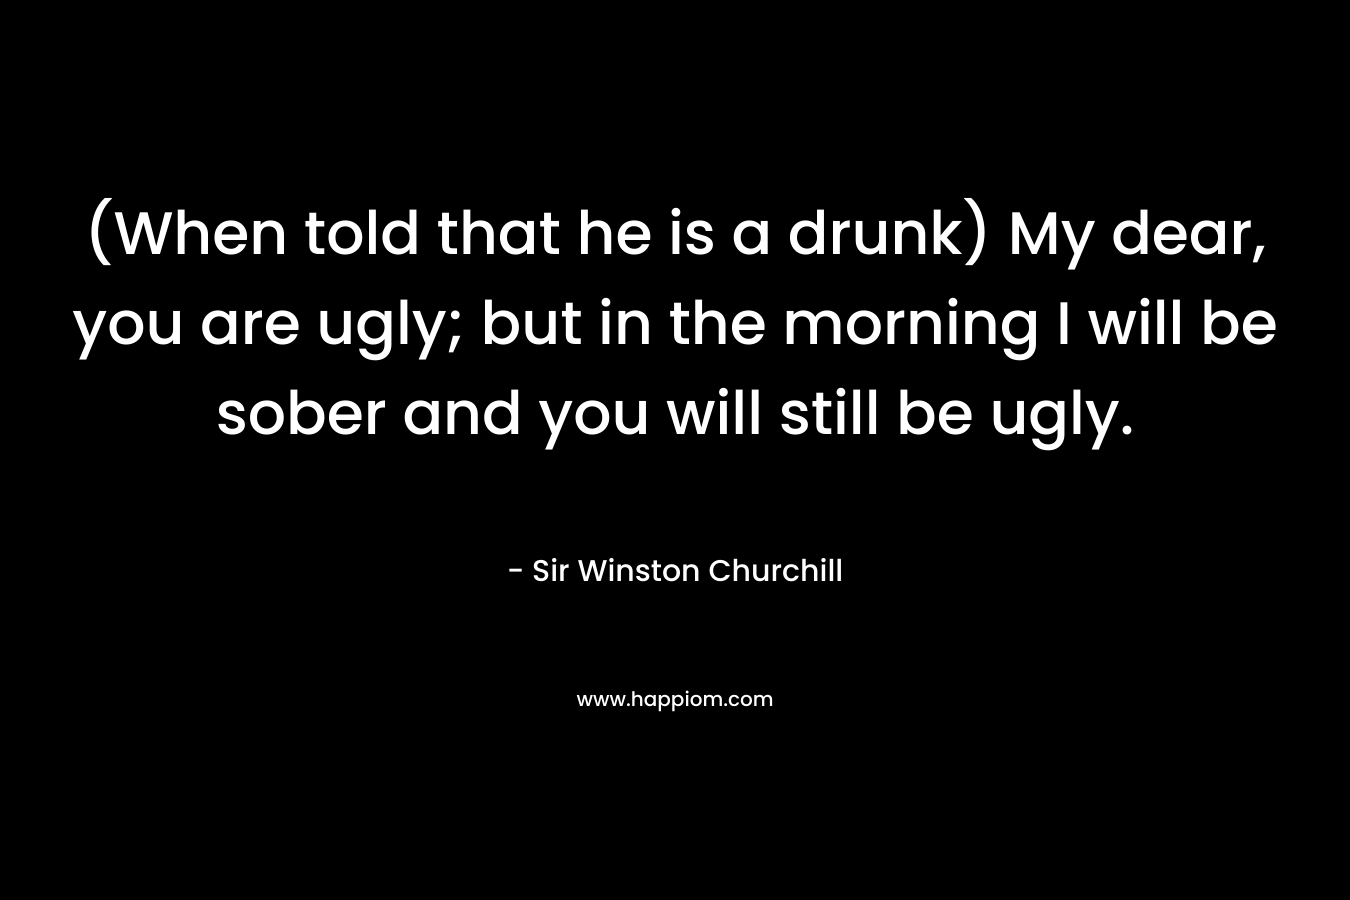 (When told that he is a drunk) My dear, you are ugly; but in the morning I will be sober and you will still be ugly.